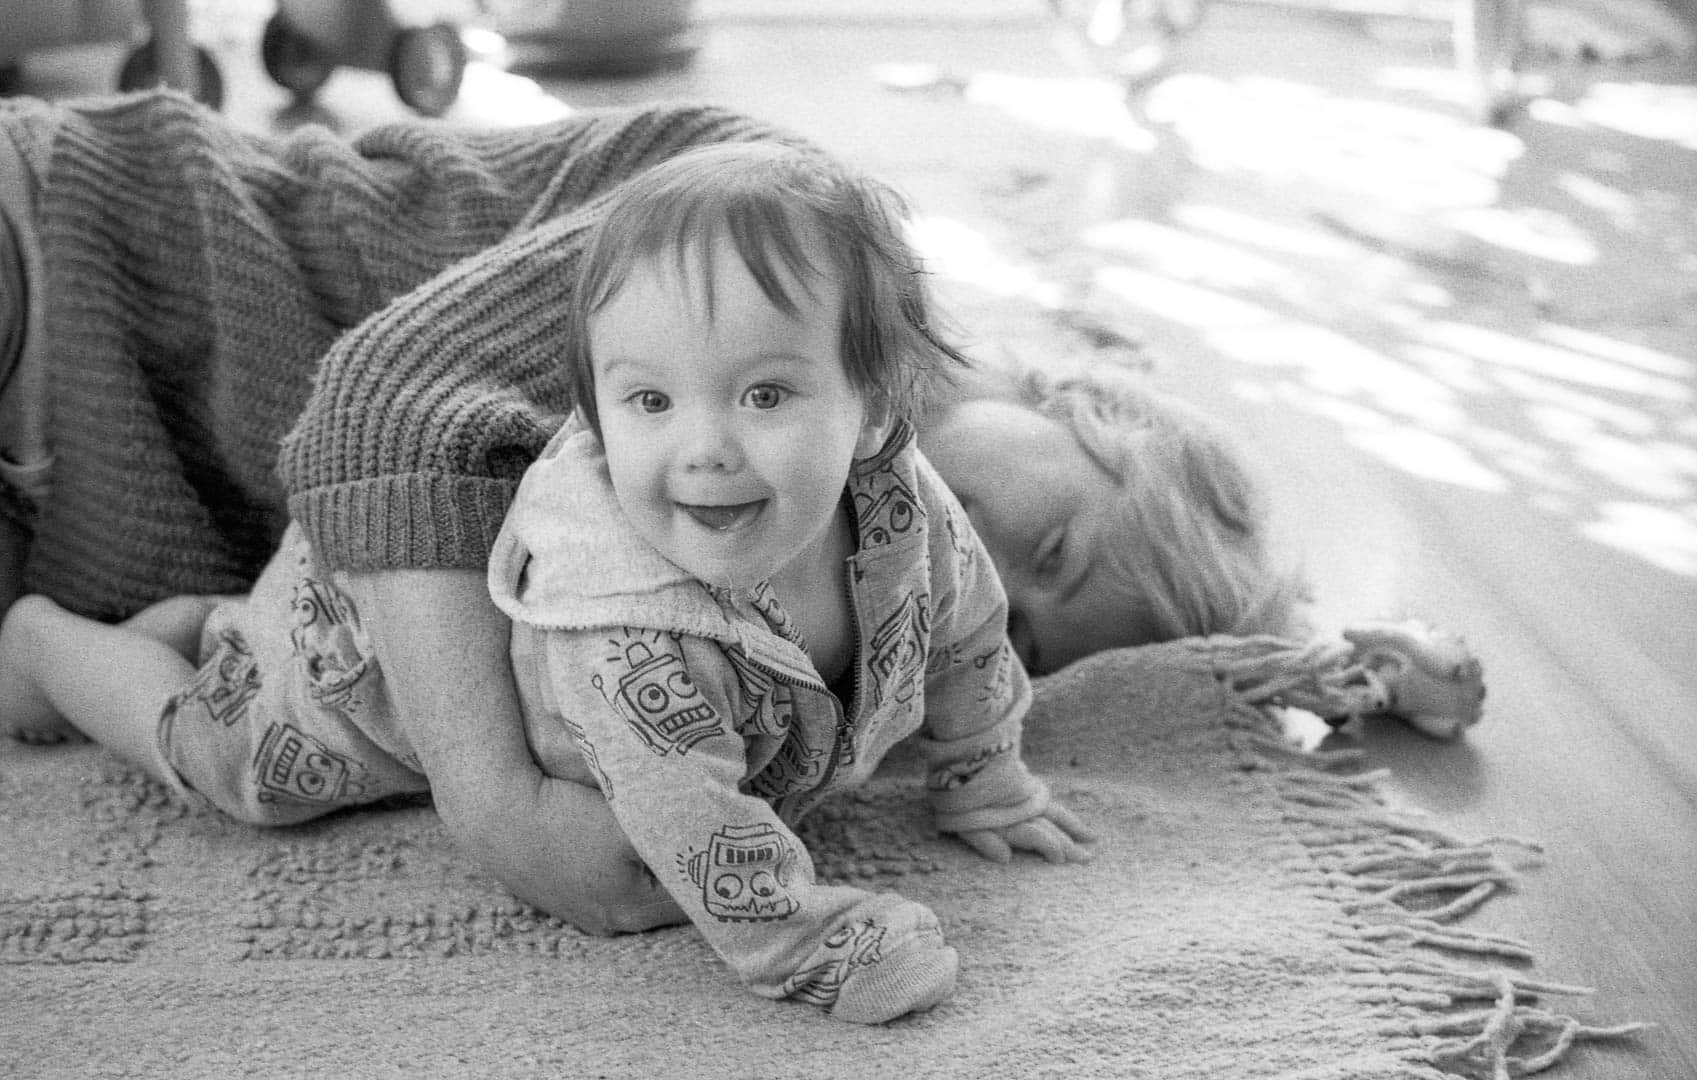 A woman and child playing on a living room floor